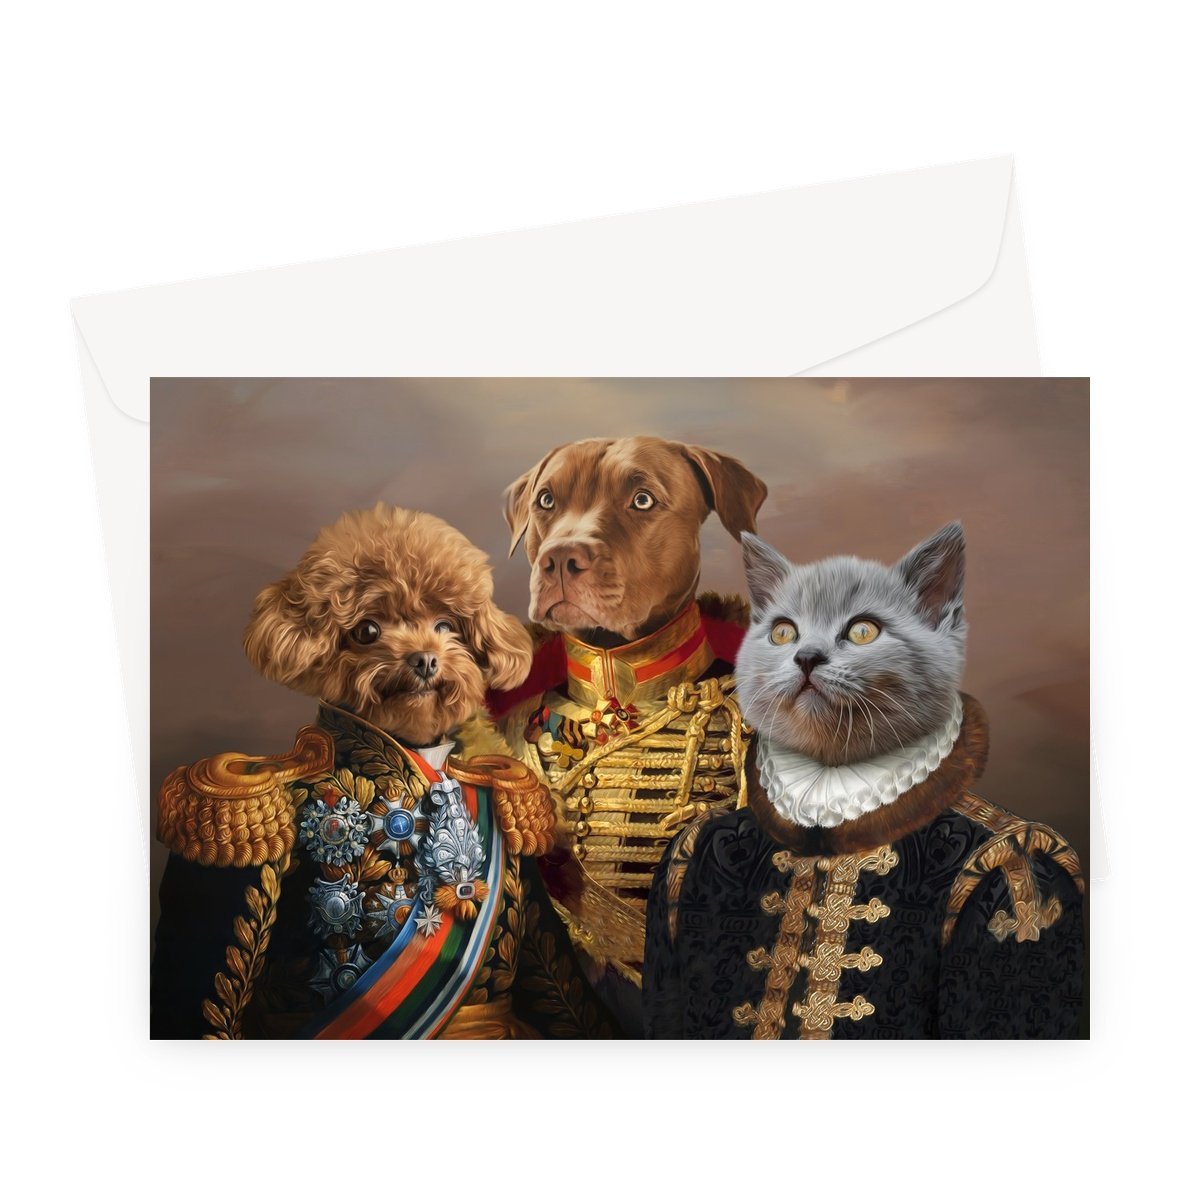 The 3 Brothers In Arms: Custom Pet Greeting Card - Paw & Glory - pawandglory, dog portraits admiral, pet portraits usa, pet portrait singapore, dog portraits admiral, dog portraits as humans, admiral dog portrait, pet portrait